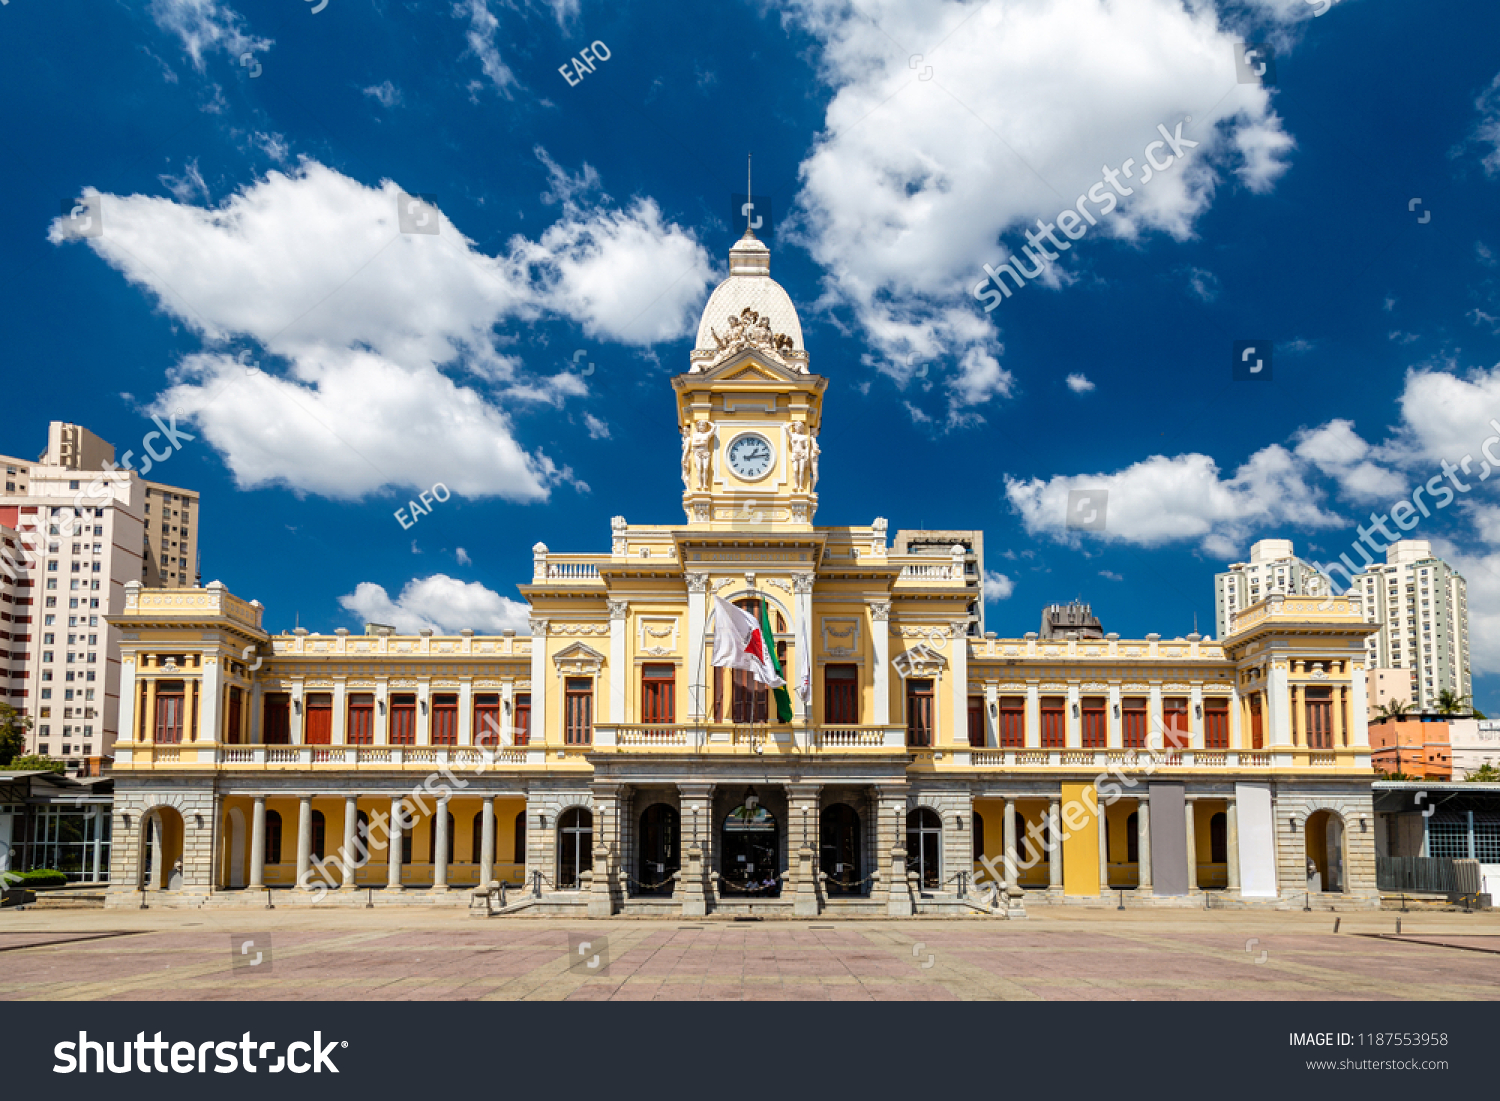 Building of the Museum of Arts and Crafts at the Station Square in Belo Horizonte, Minas Gerais, Brazil. #1187553958